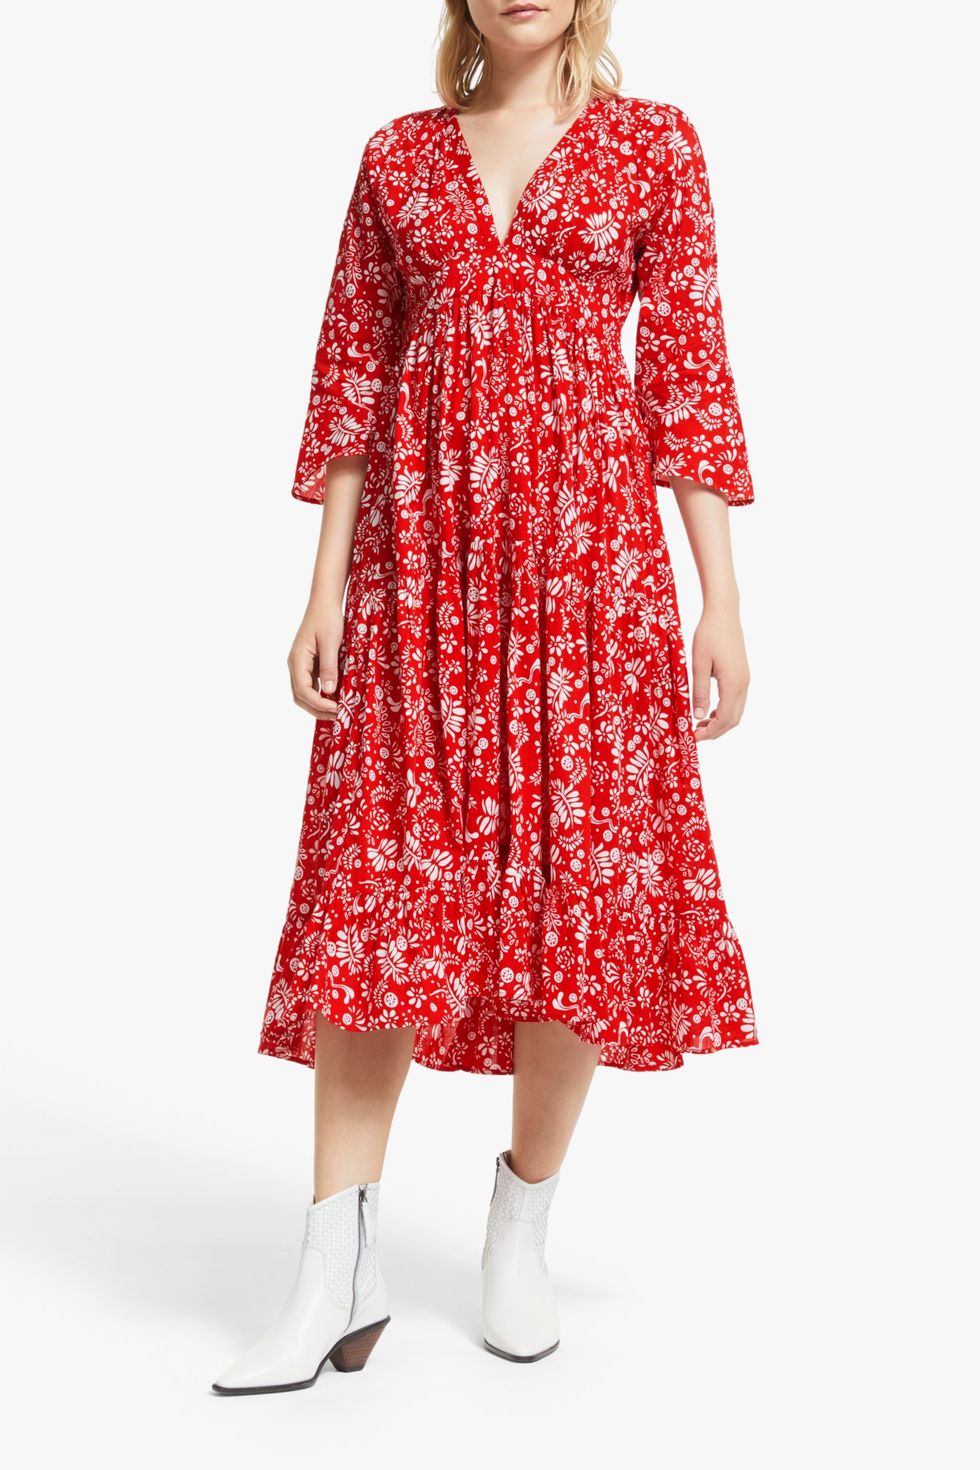 AND/OR La Galeria Elefante Mexicana Fern Print Tiered Maxi Dress, Red/Ivory